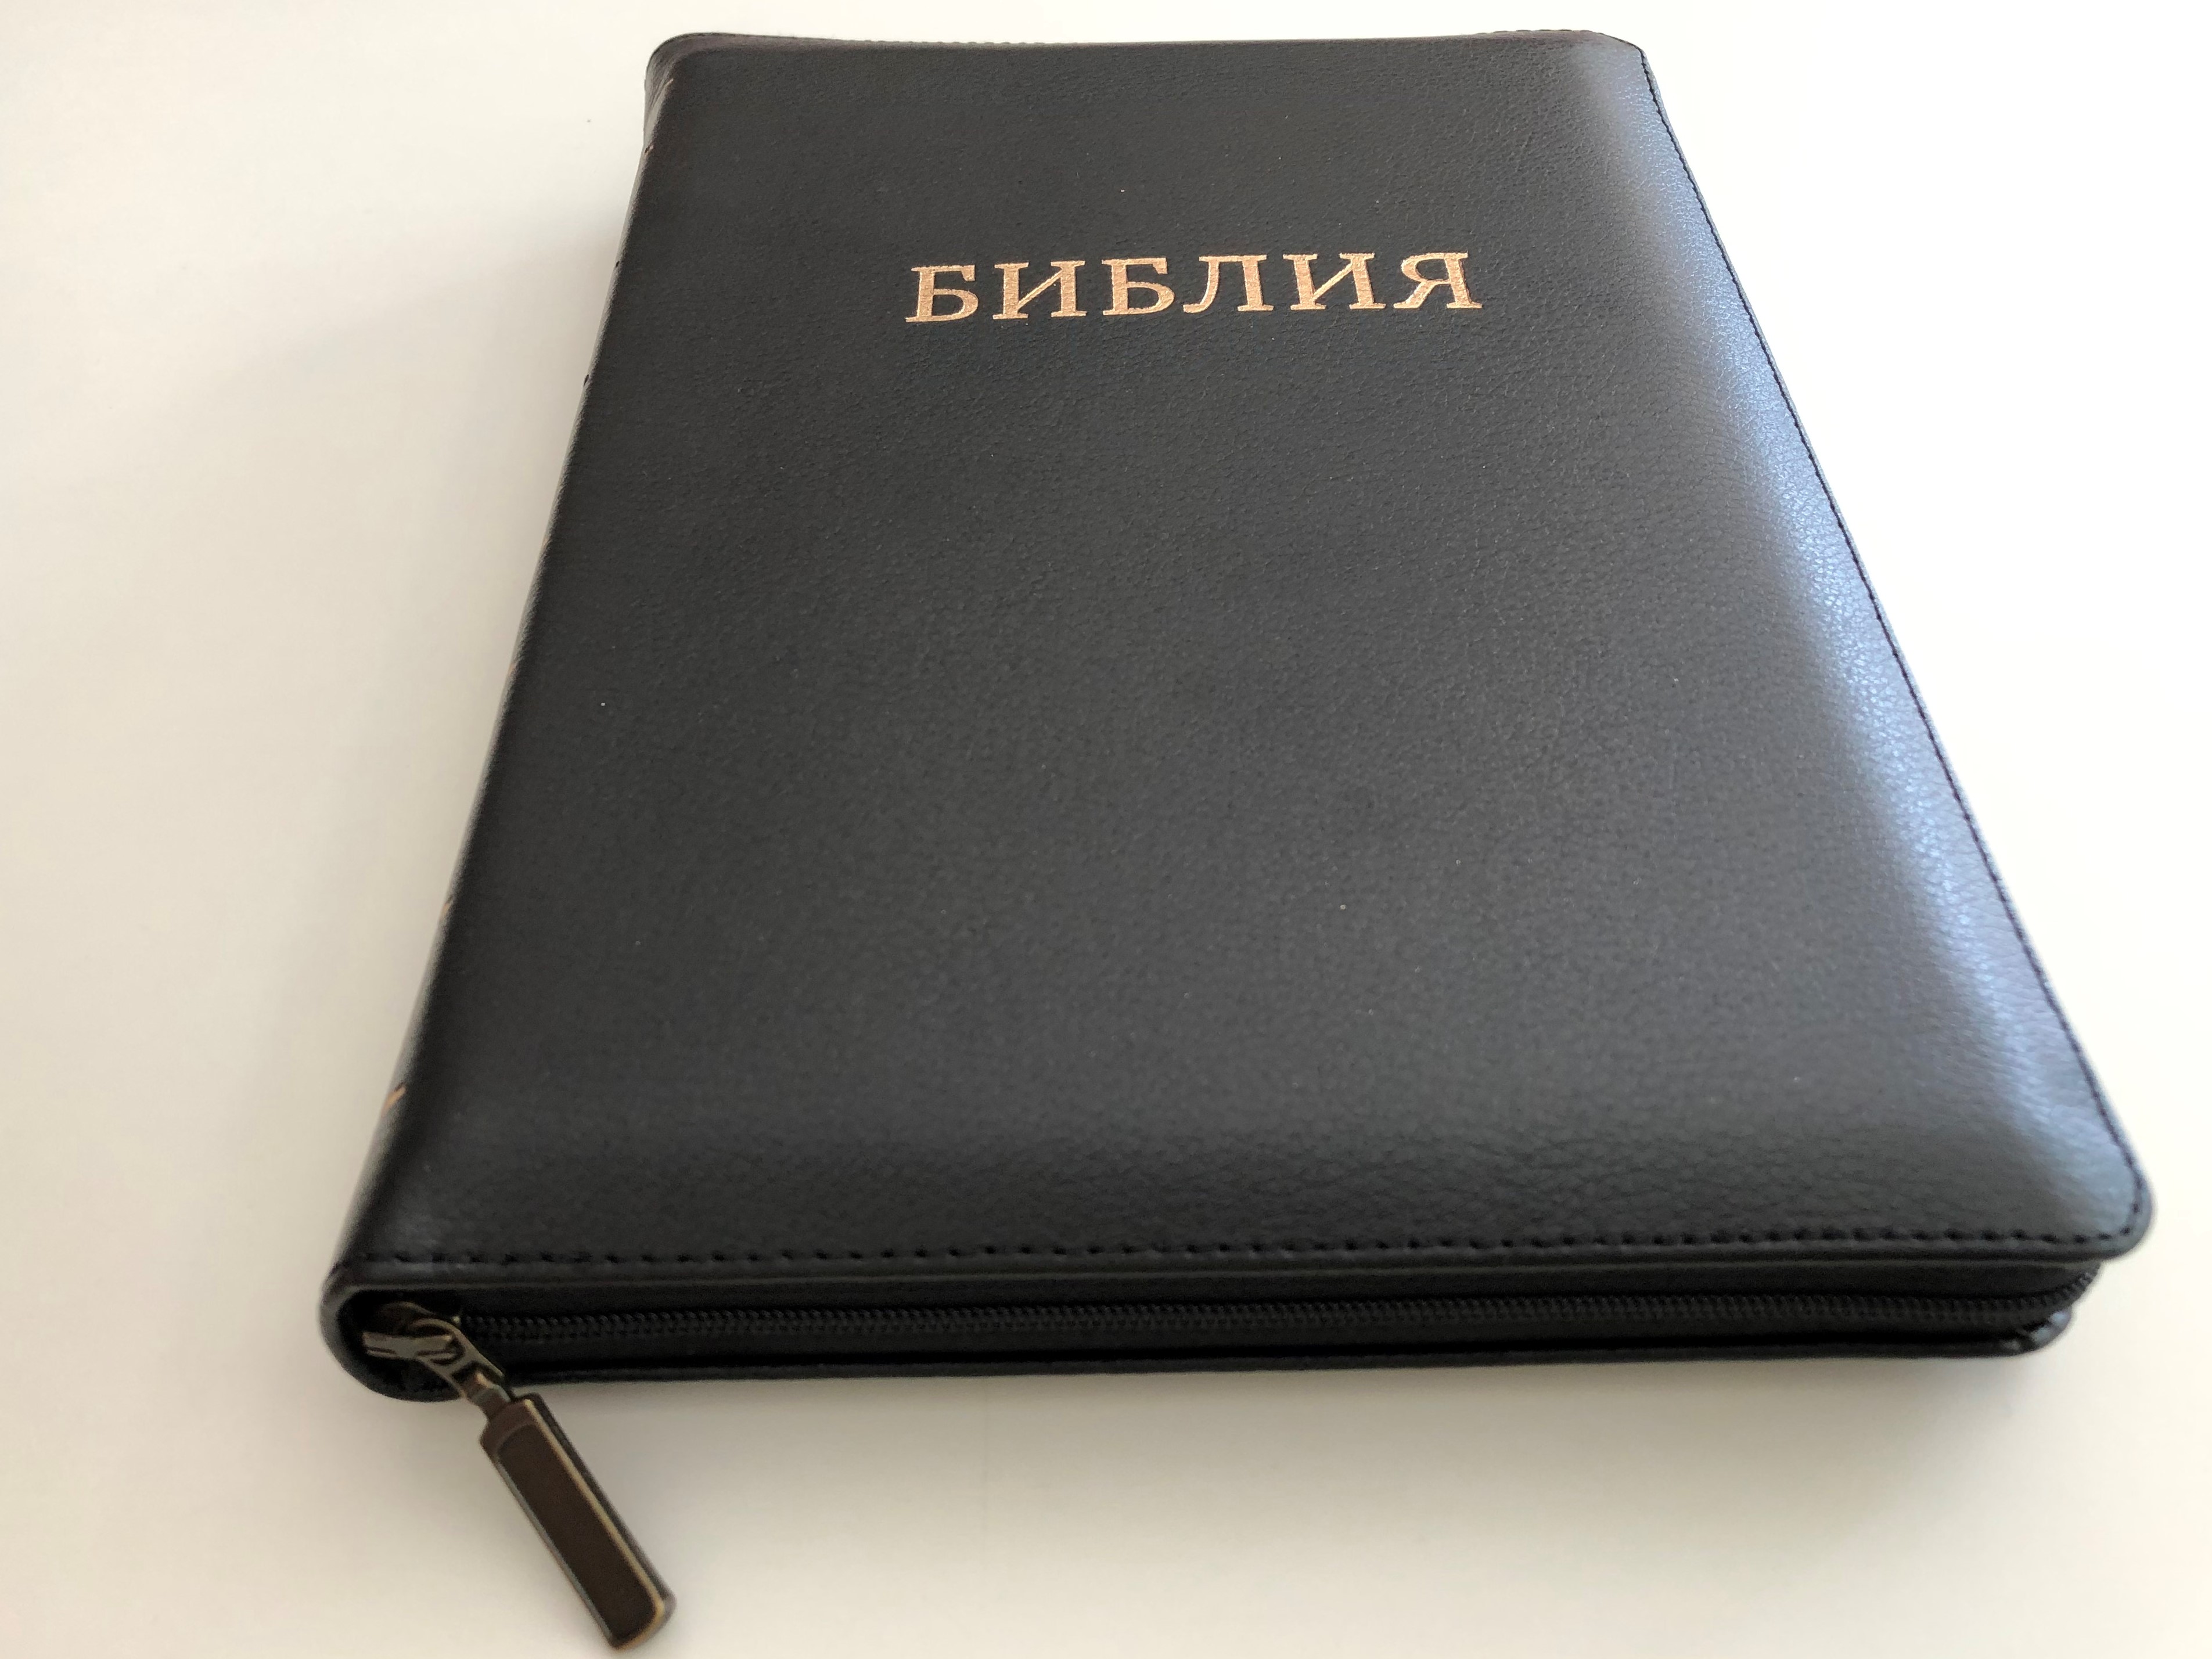 -russian-leather-bound-holy-bible-synodal-translation-ukrainian-bible-society-2012-leather-bound-with-zipper-golden-edges-thumb-index-2-.jpg